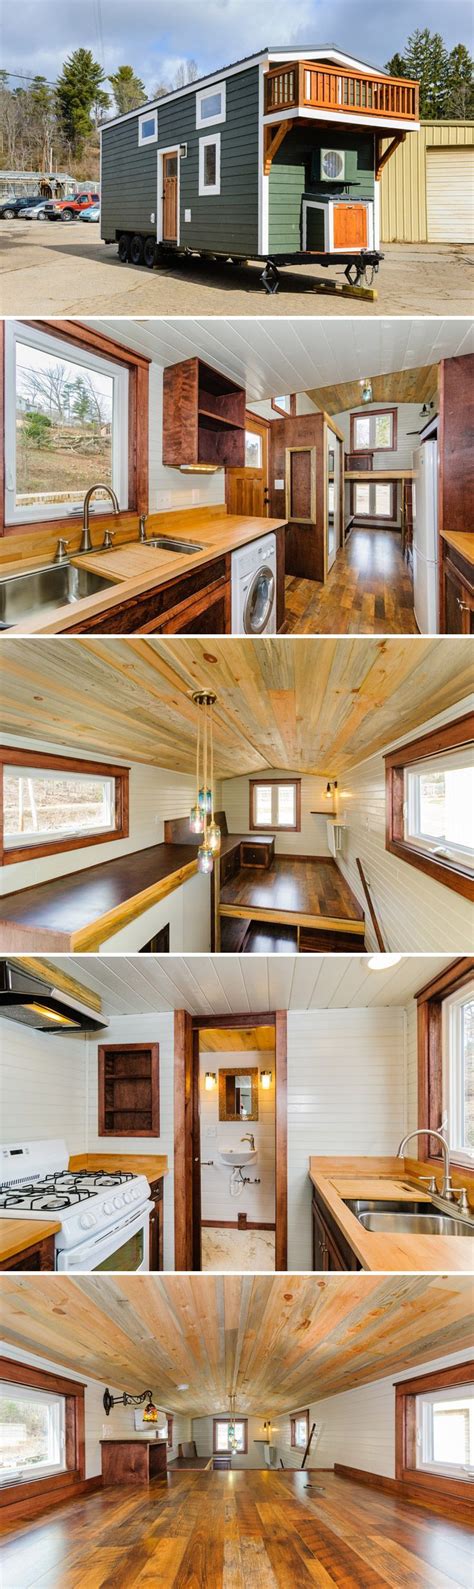 Tiny House Living This 208 Sqft Tiny House On Wheels Includes A